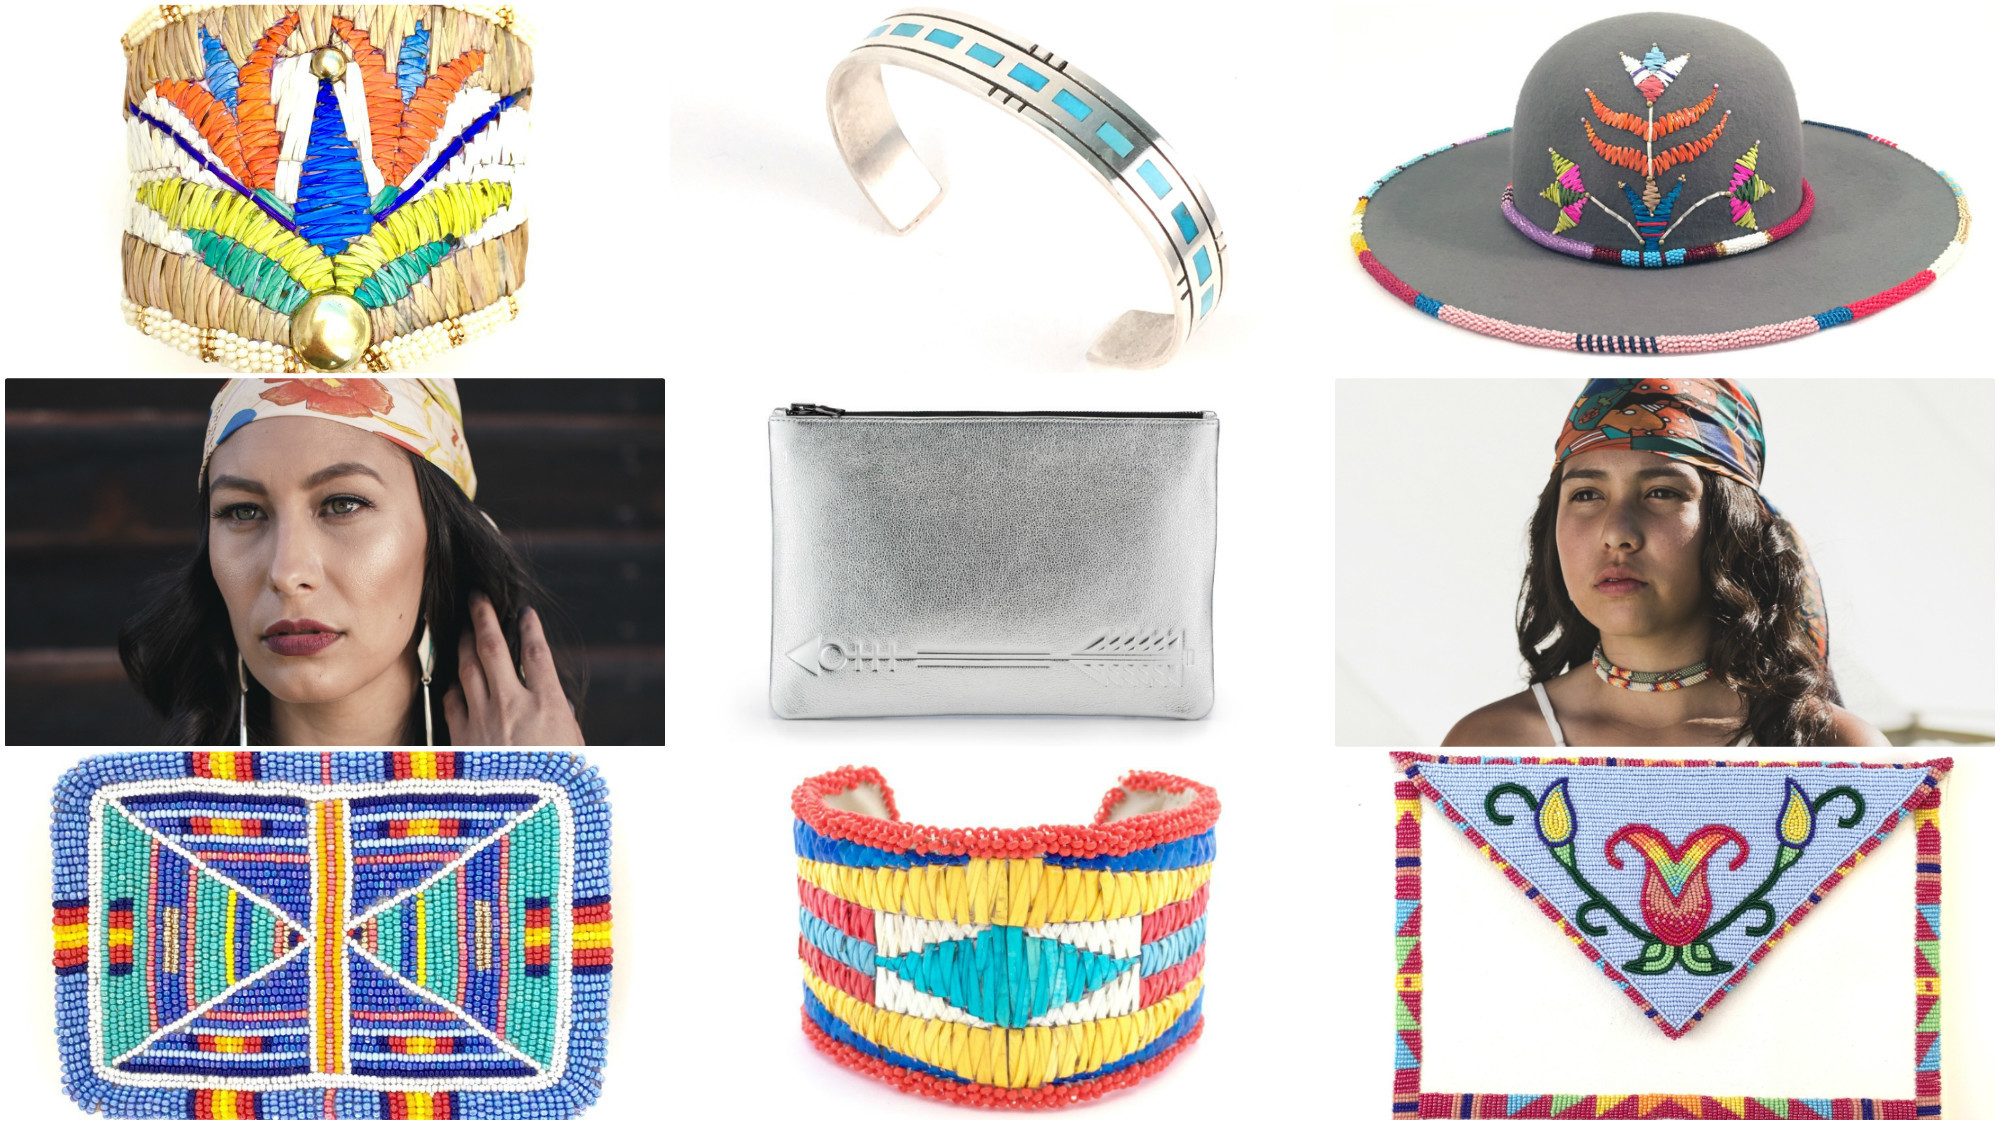 B.Yellowtail Collective pieces are designed by Native American artists across the Great Plains tribal regions.